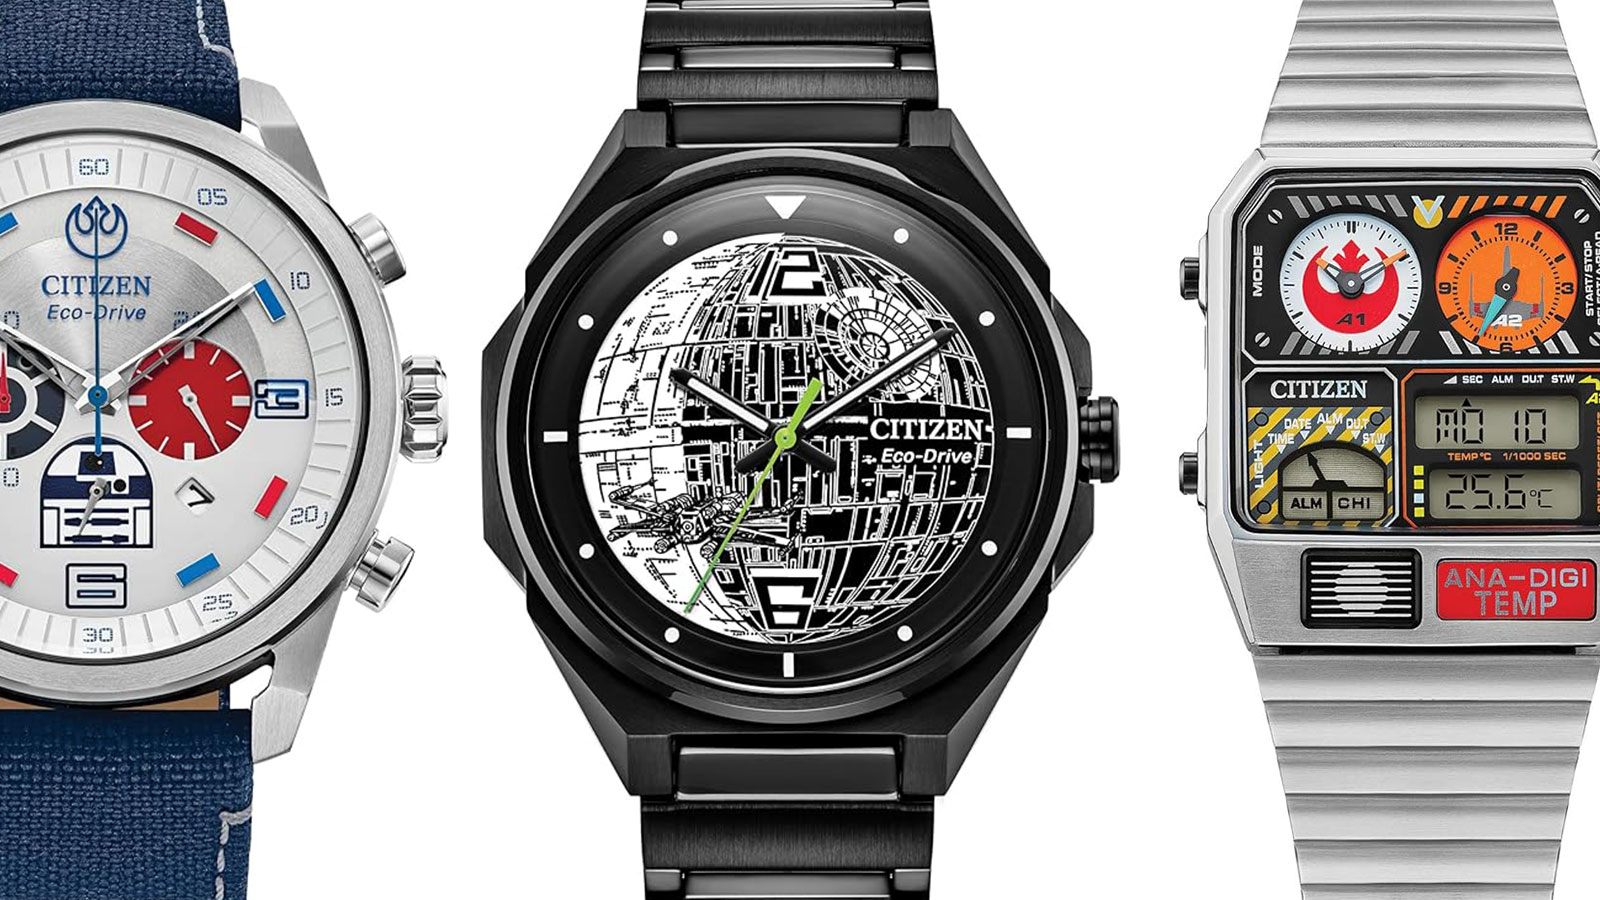 The Citizen x Star Wars Death Star watch is finally back in stock and on sale for May the 4th